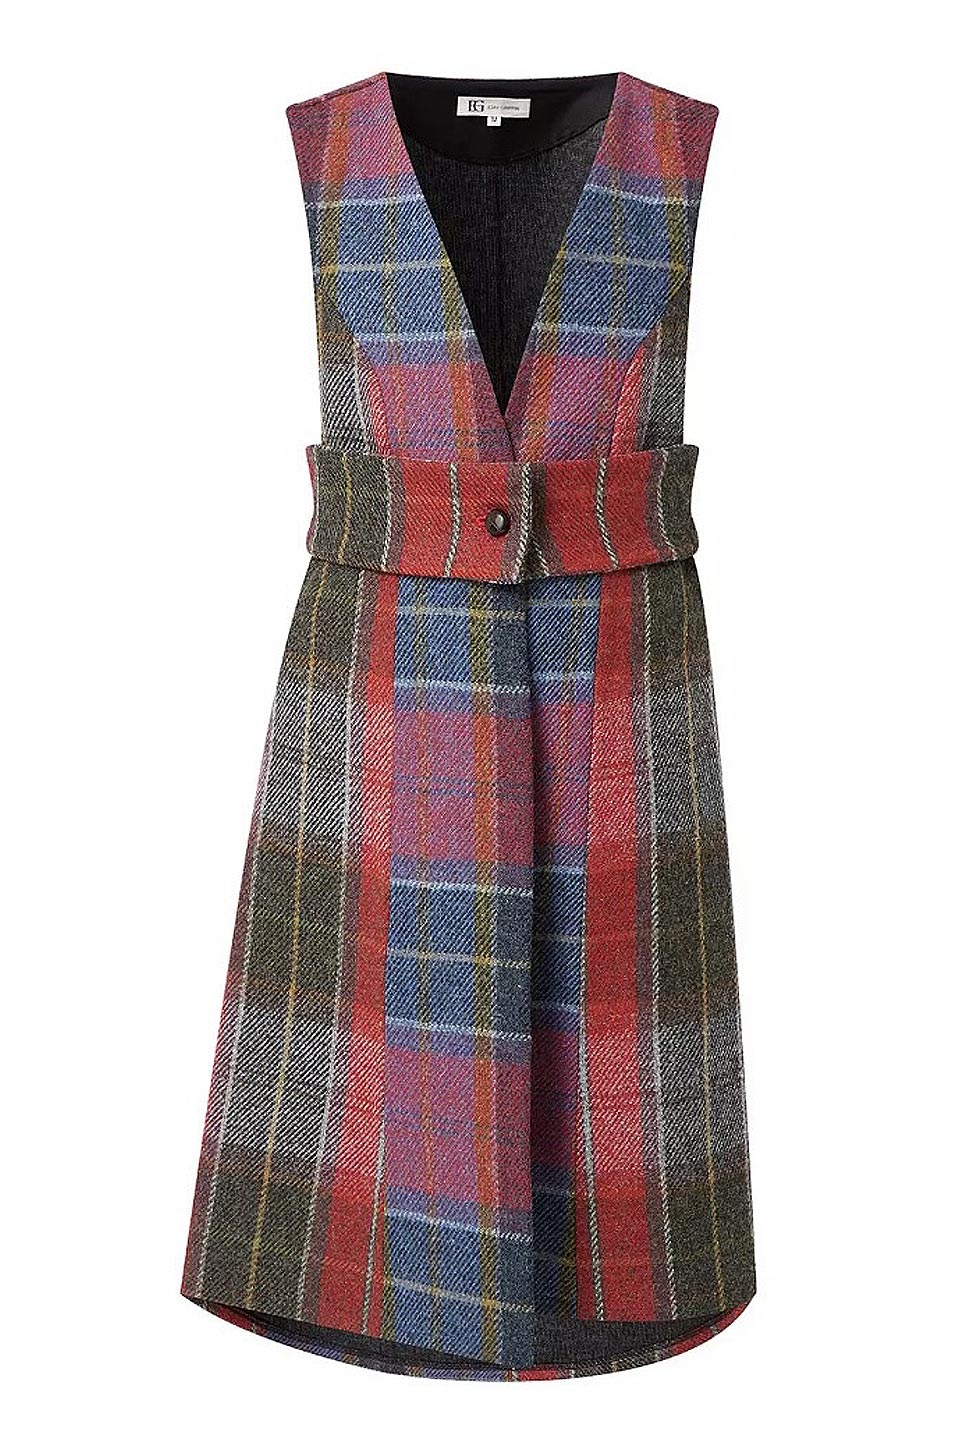 SL Gilet - Pink and Red Check Tweed